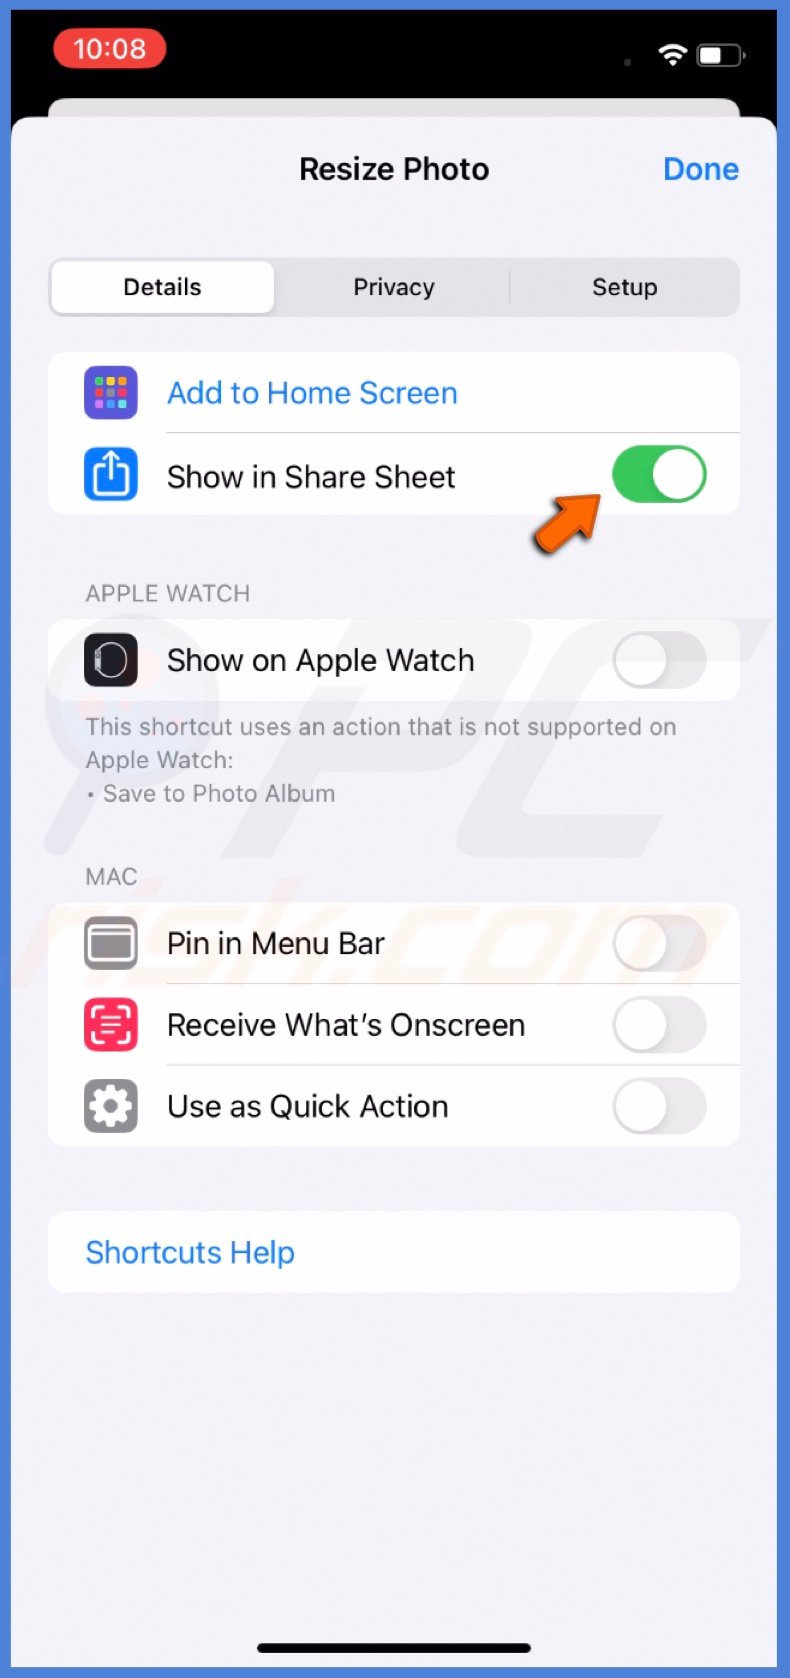 Enable Show in Share Sheet